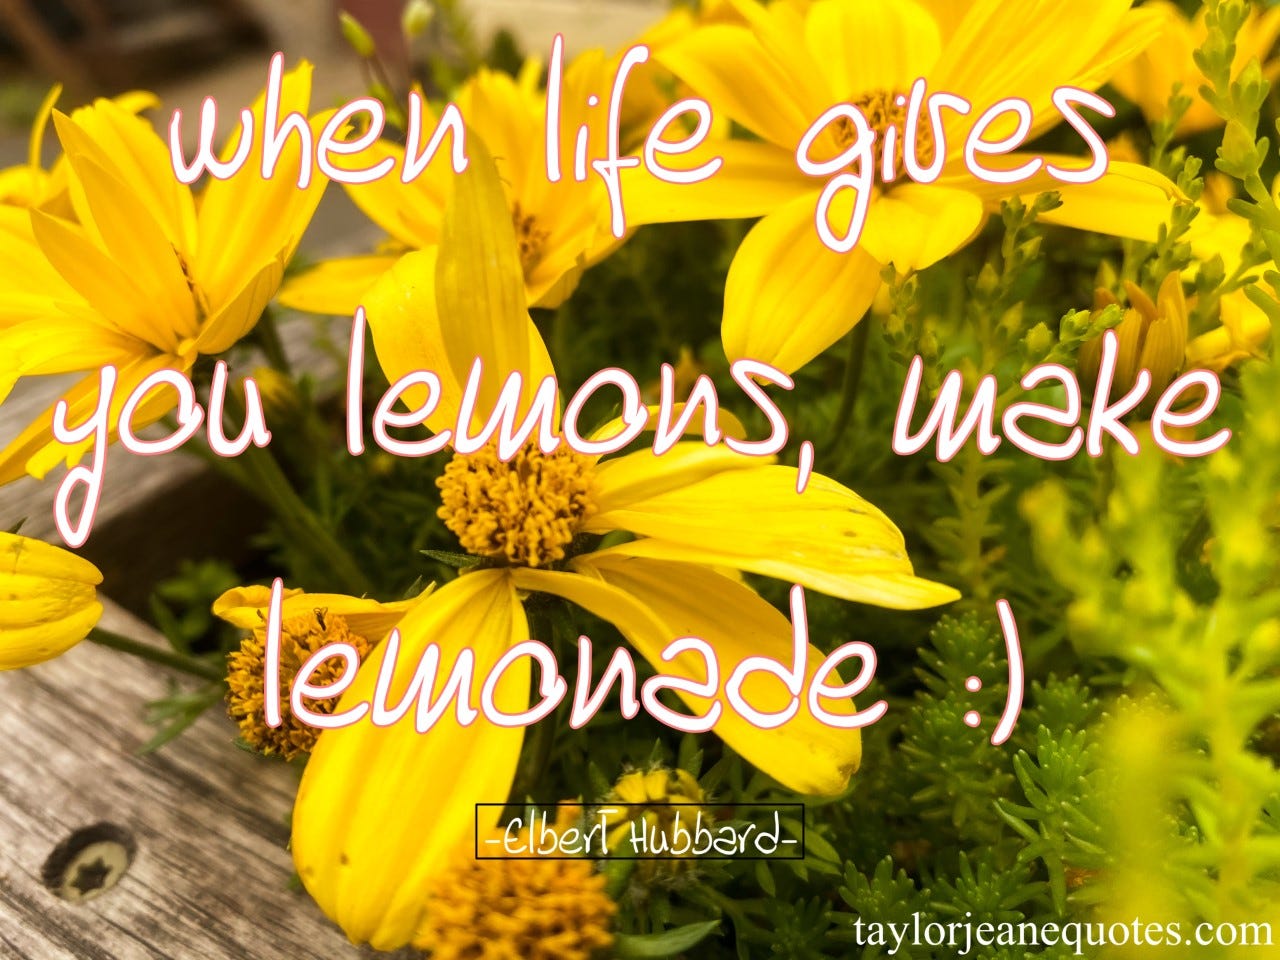 taylor jeane quotes, taylor jeane, taylor wilson, quotes, quote of the day, free quote of the day emails, elbert hubbard, elbert hubbard quotes, famous quotes, when life gives you lemons make lemonade quote, happiness quotes, life quotes, positive quotes, motivational quotes, inspirational quotes, quotes for positive thinking, mindset quotes, famous quotes, popular quotes, simple quotes, lemon quote, lemonade quote